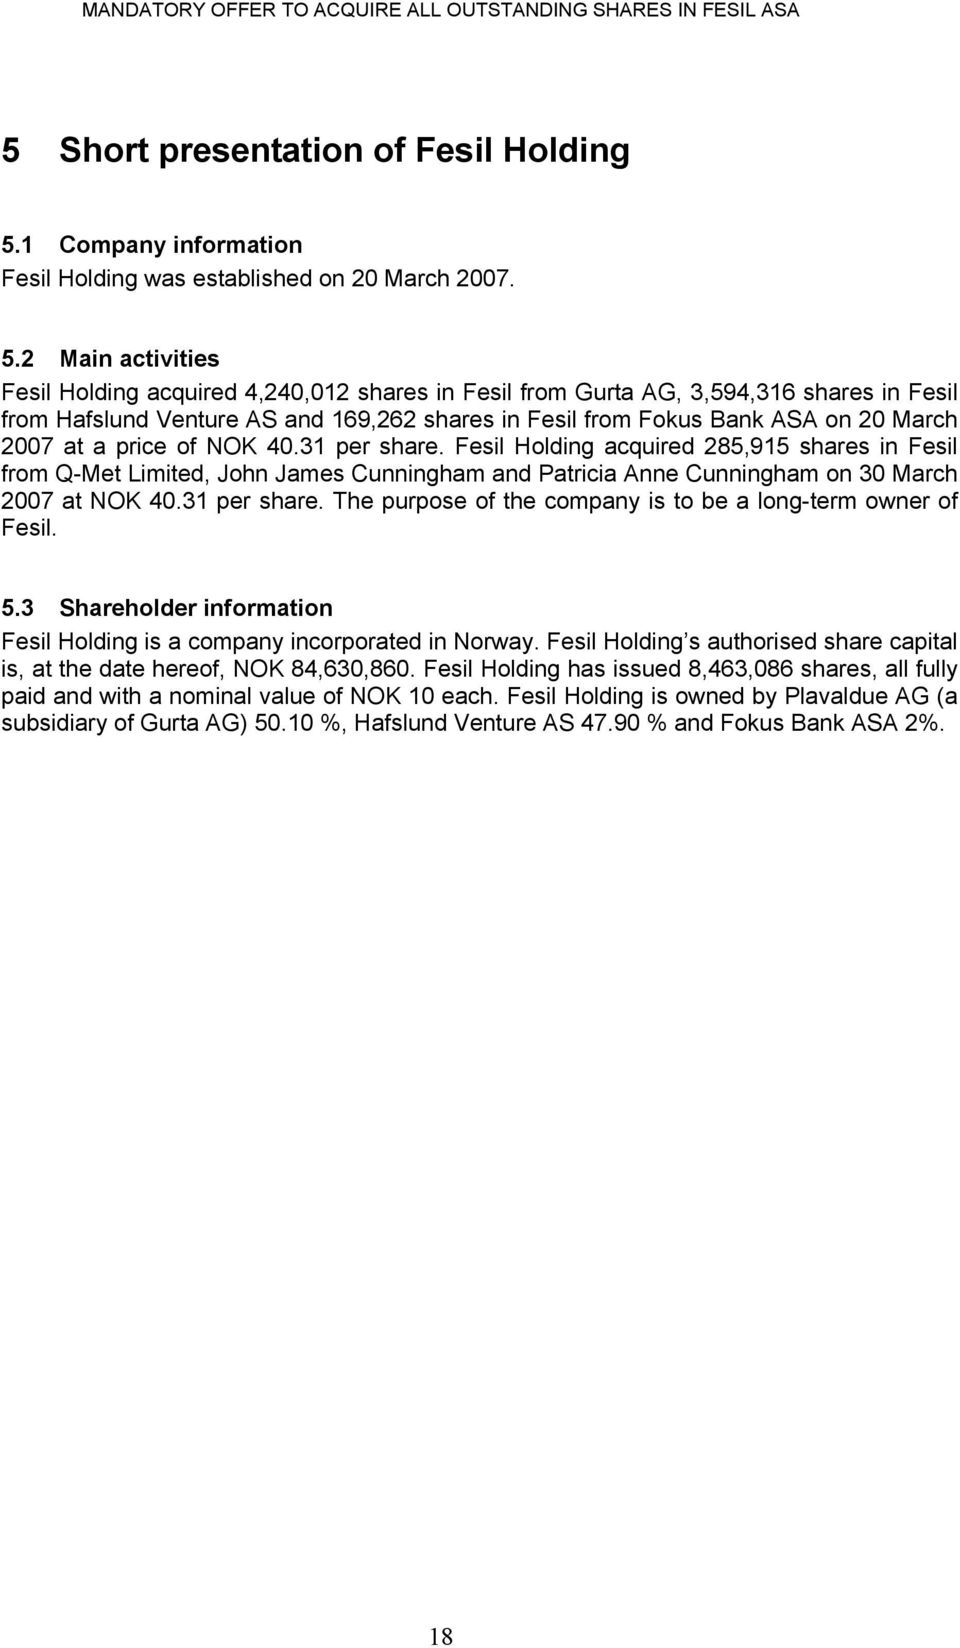 2 Main activities Fesil Holding acquired 4,240,012 shares in Fesil from Gurta AG, 3,594,316 shares in Fesil from Hafslund Venture AS and 169,262 shares in Fesil from Fokus Bank ASA on 20 March 2007